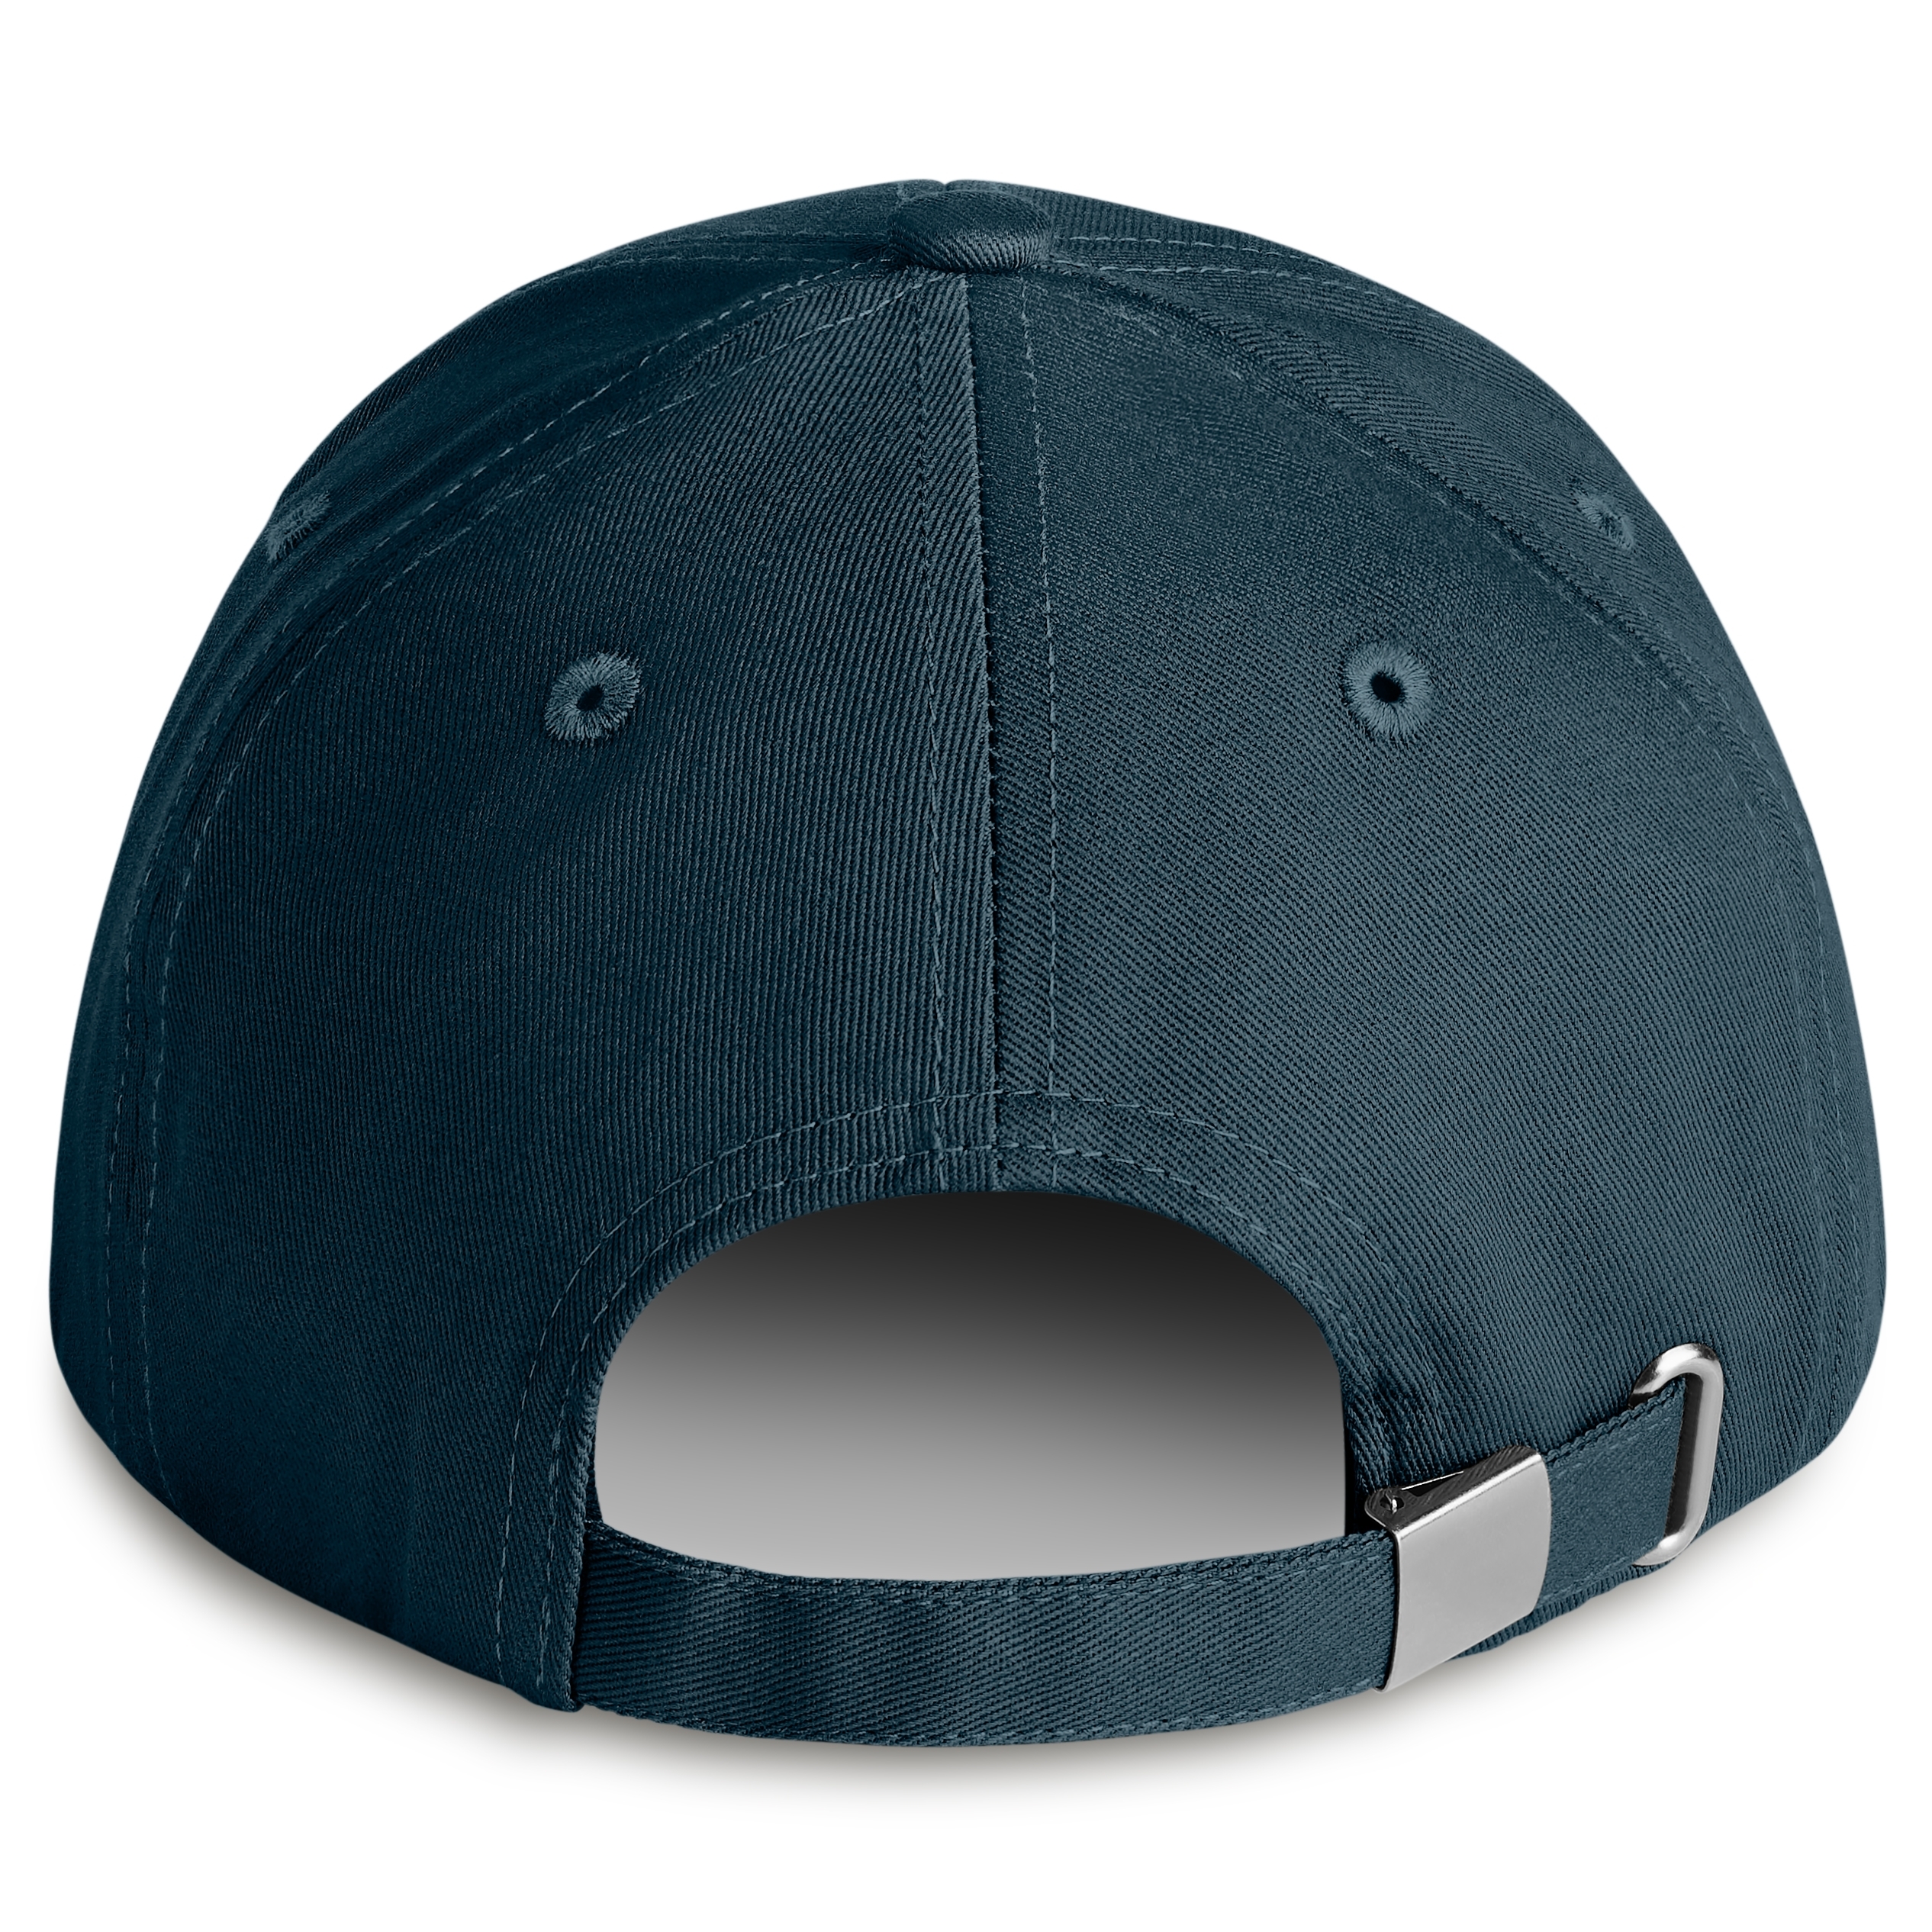 Blue Lucleon | Cap Baseball | In Navy Lacuna stock! |